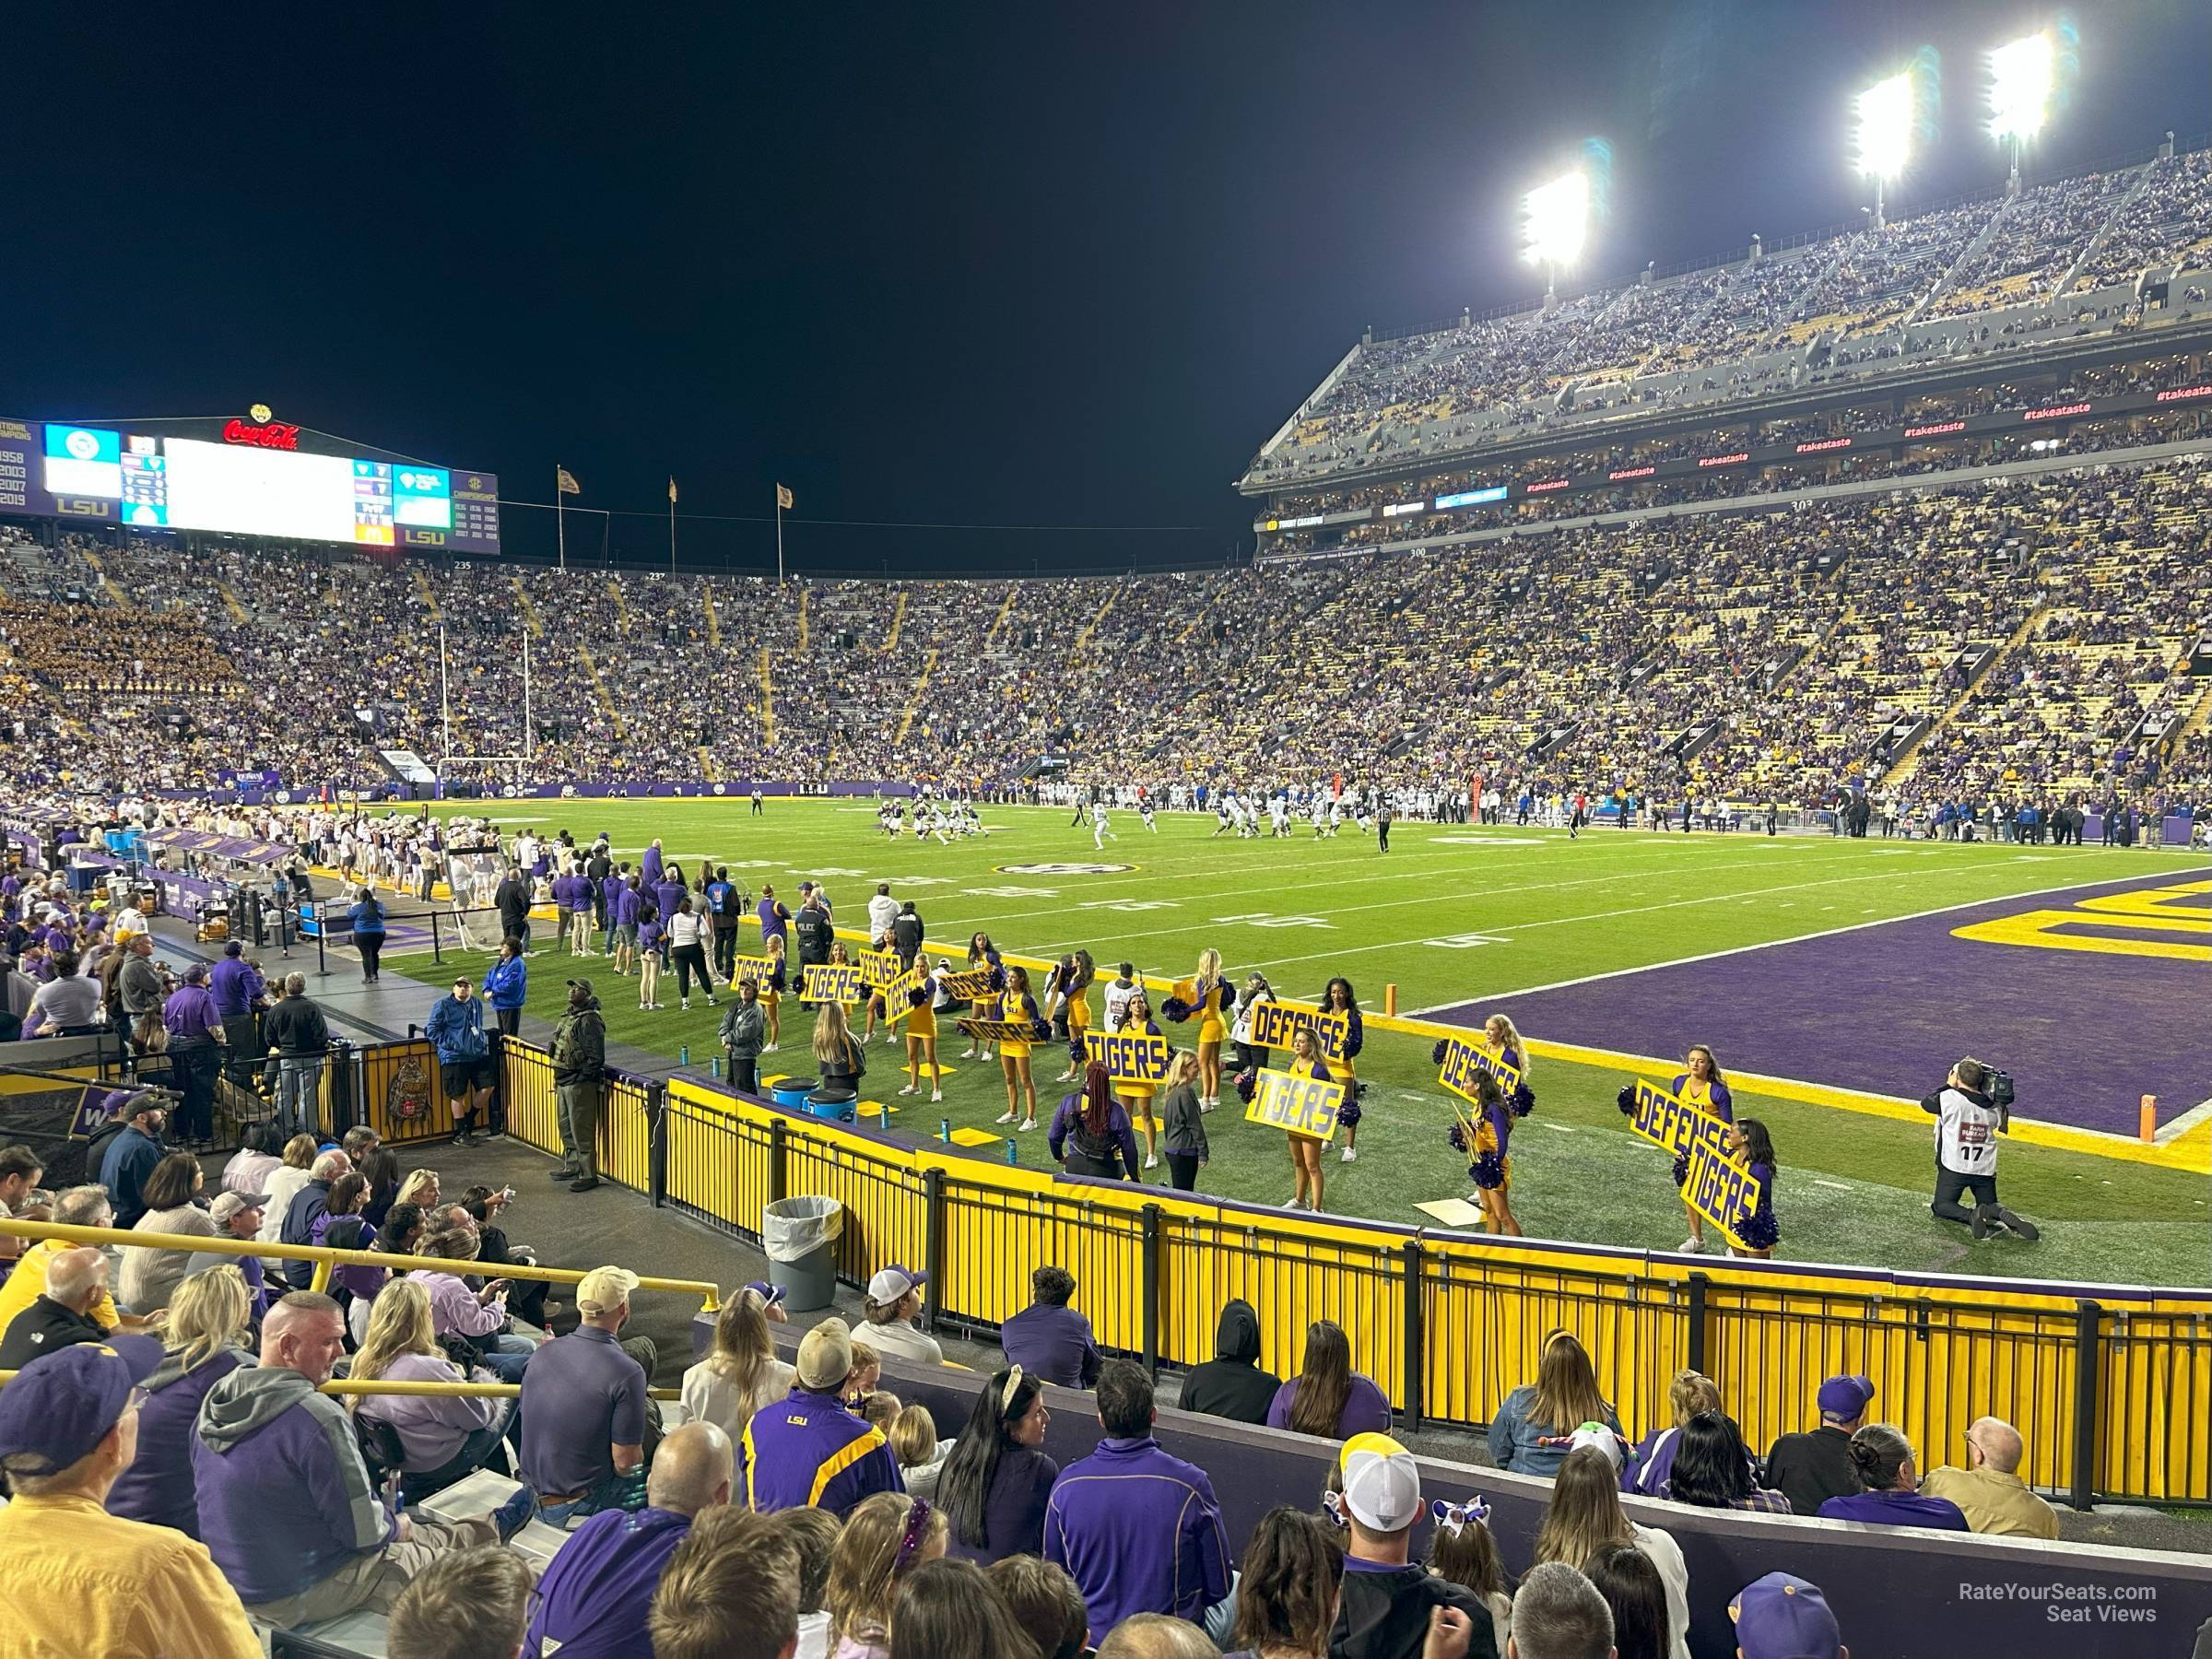 section 409, row 6 seat view  - tiger stadium